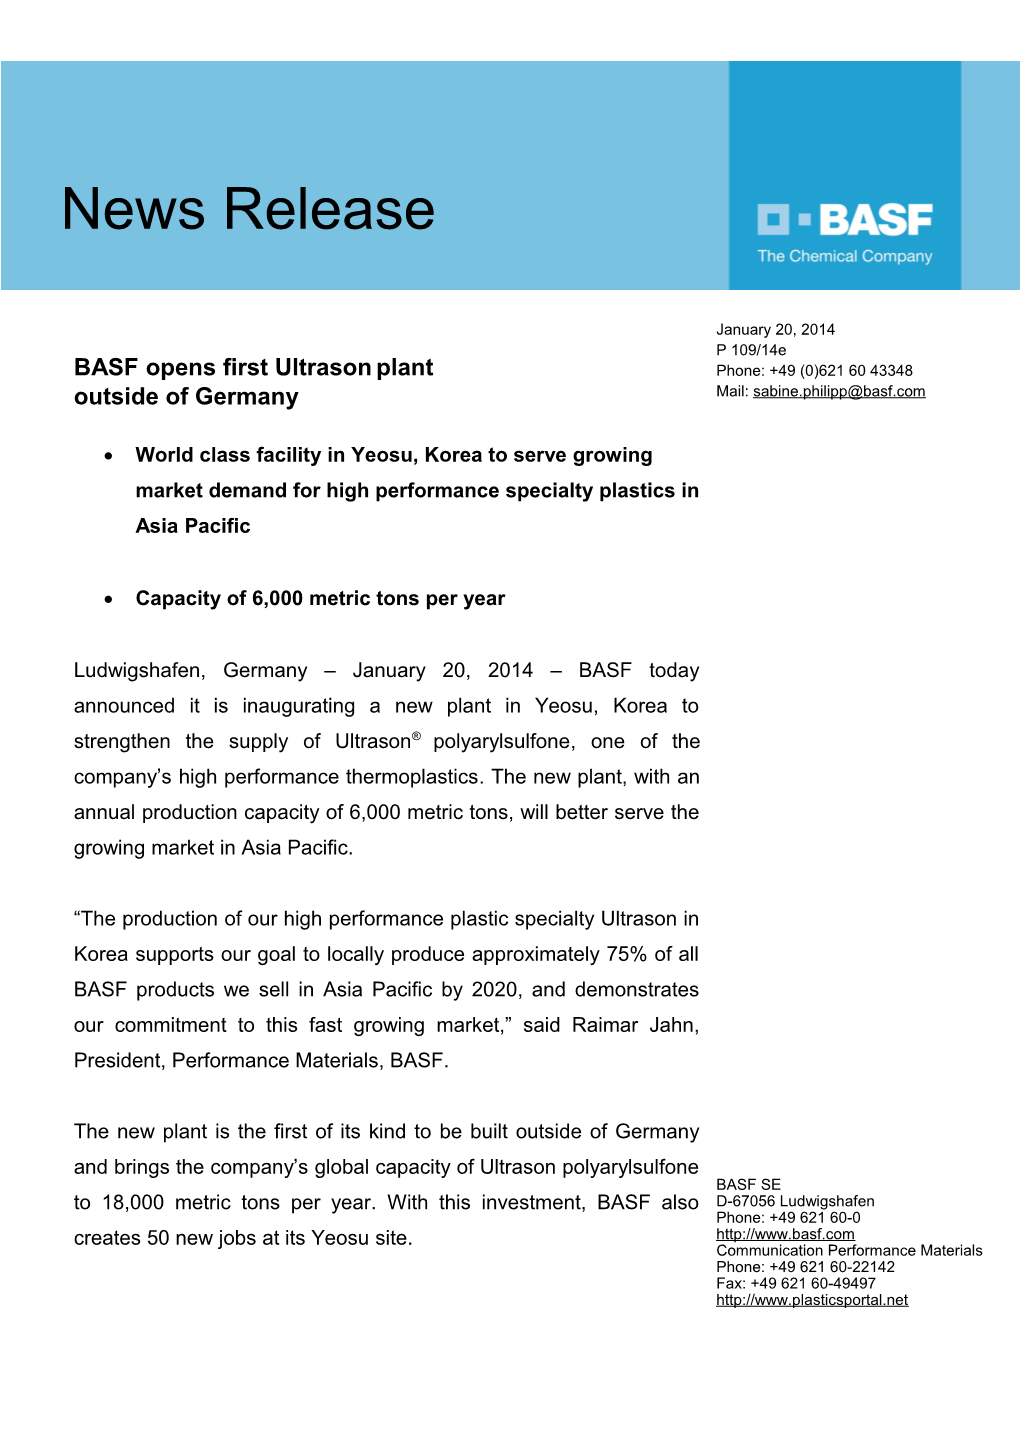 BASF Opens First Ultrasonplant Outside of Germany